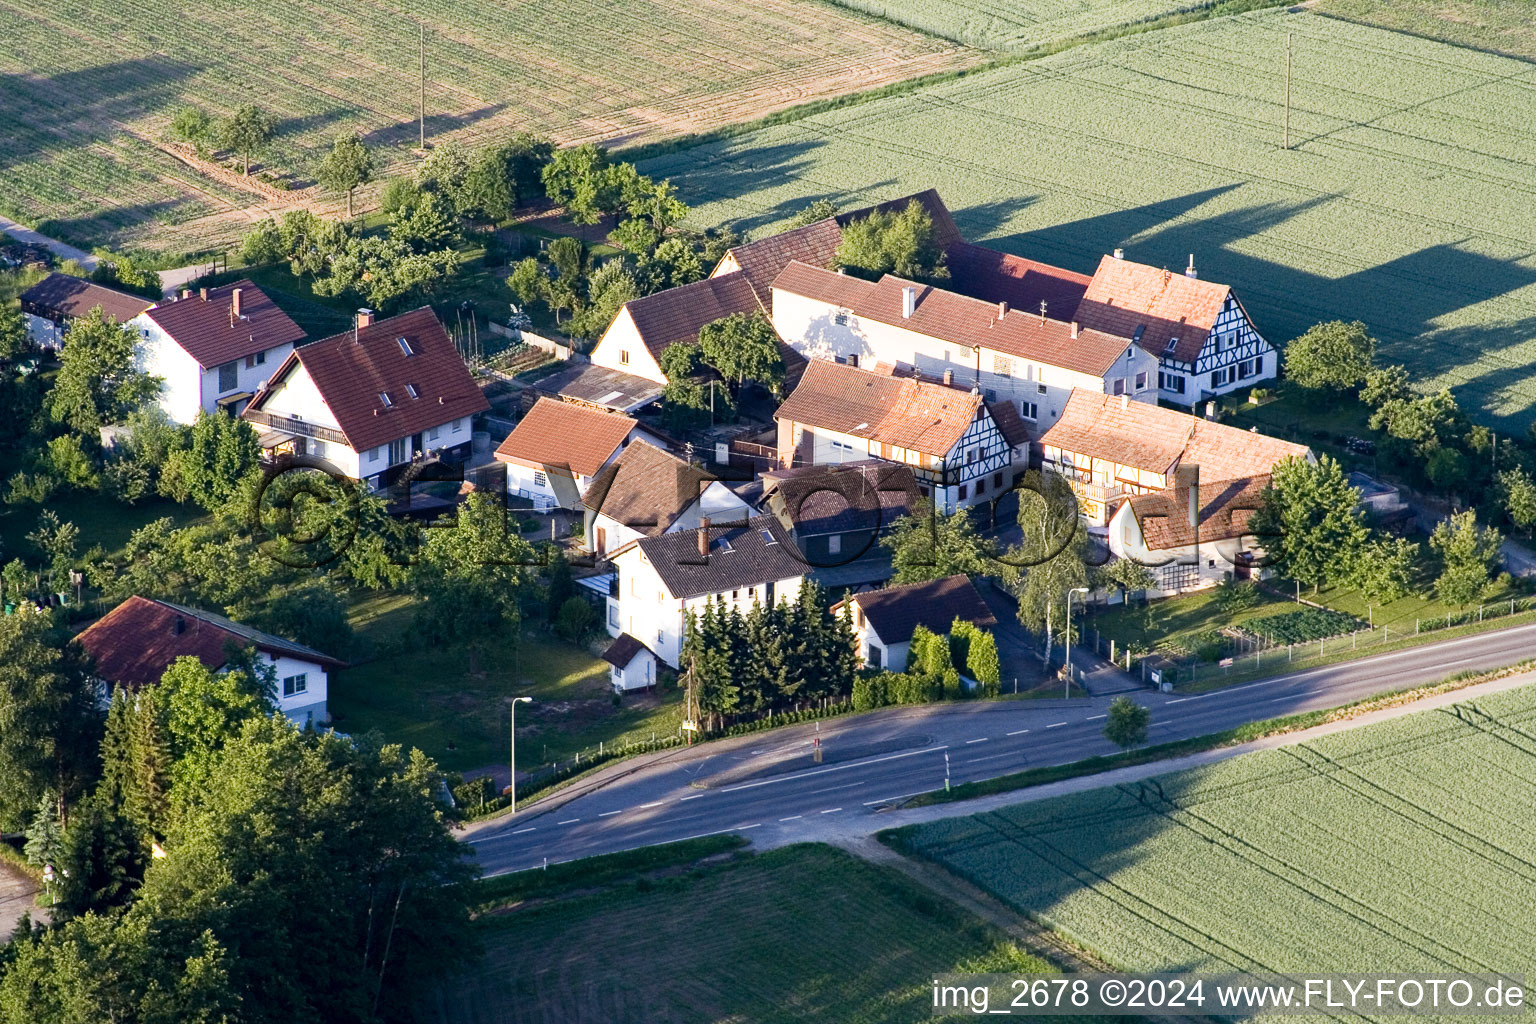 Oblique view of Village - view on the edge of agricultural fields and farmland in Minfeld in the state Rhineland-Palatinate